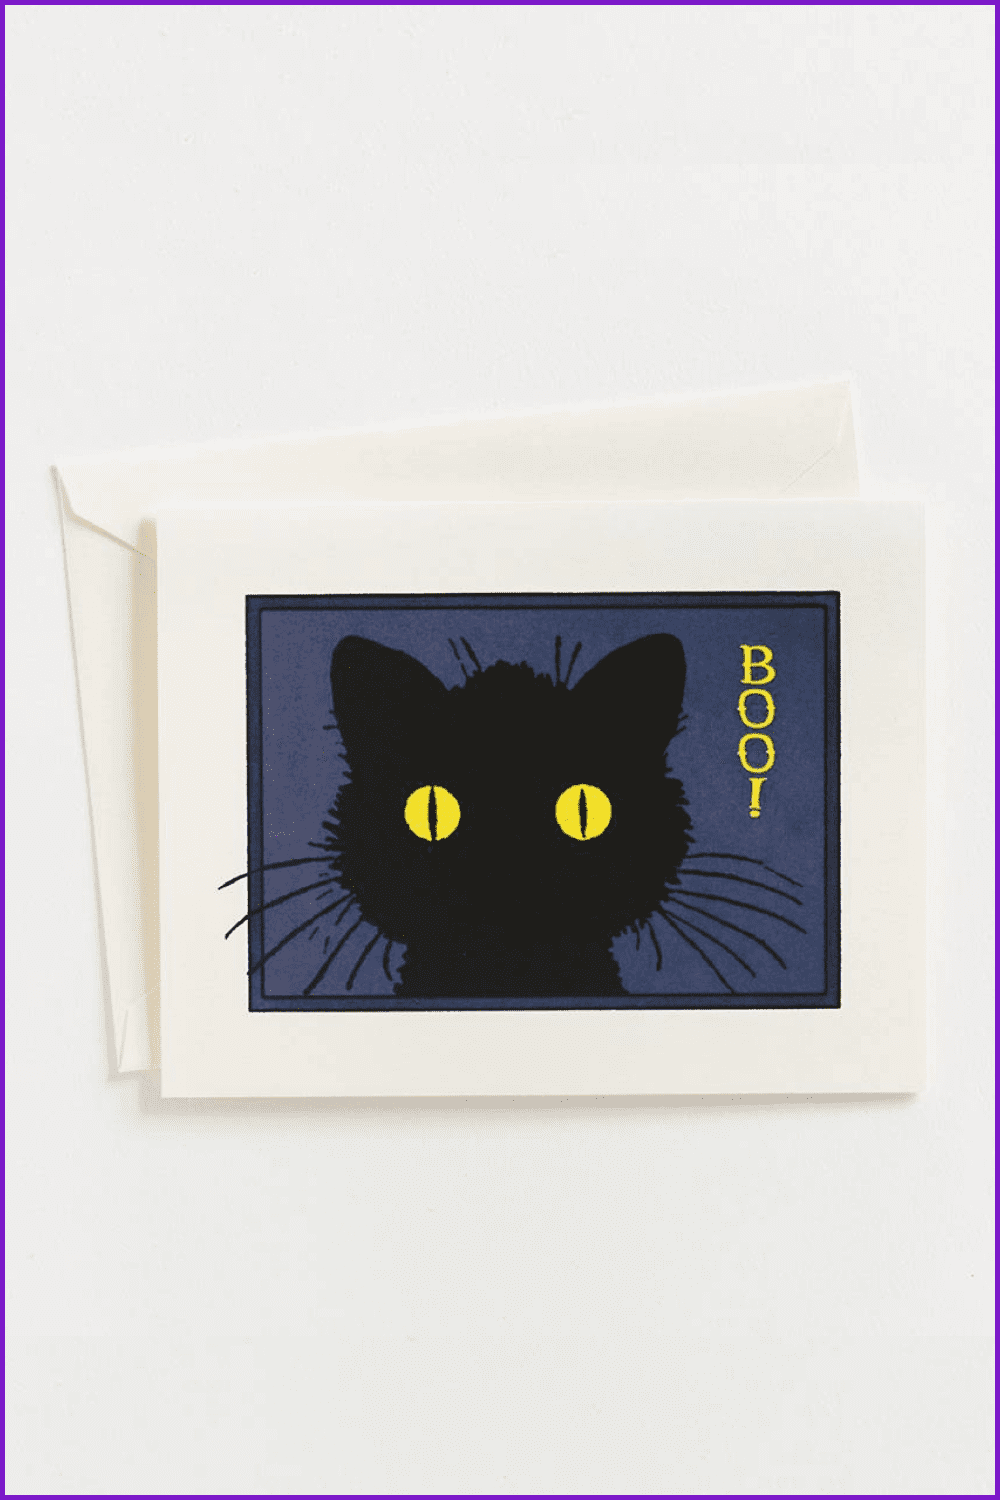 Drawn, cute black cat with bright yellow eyes.